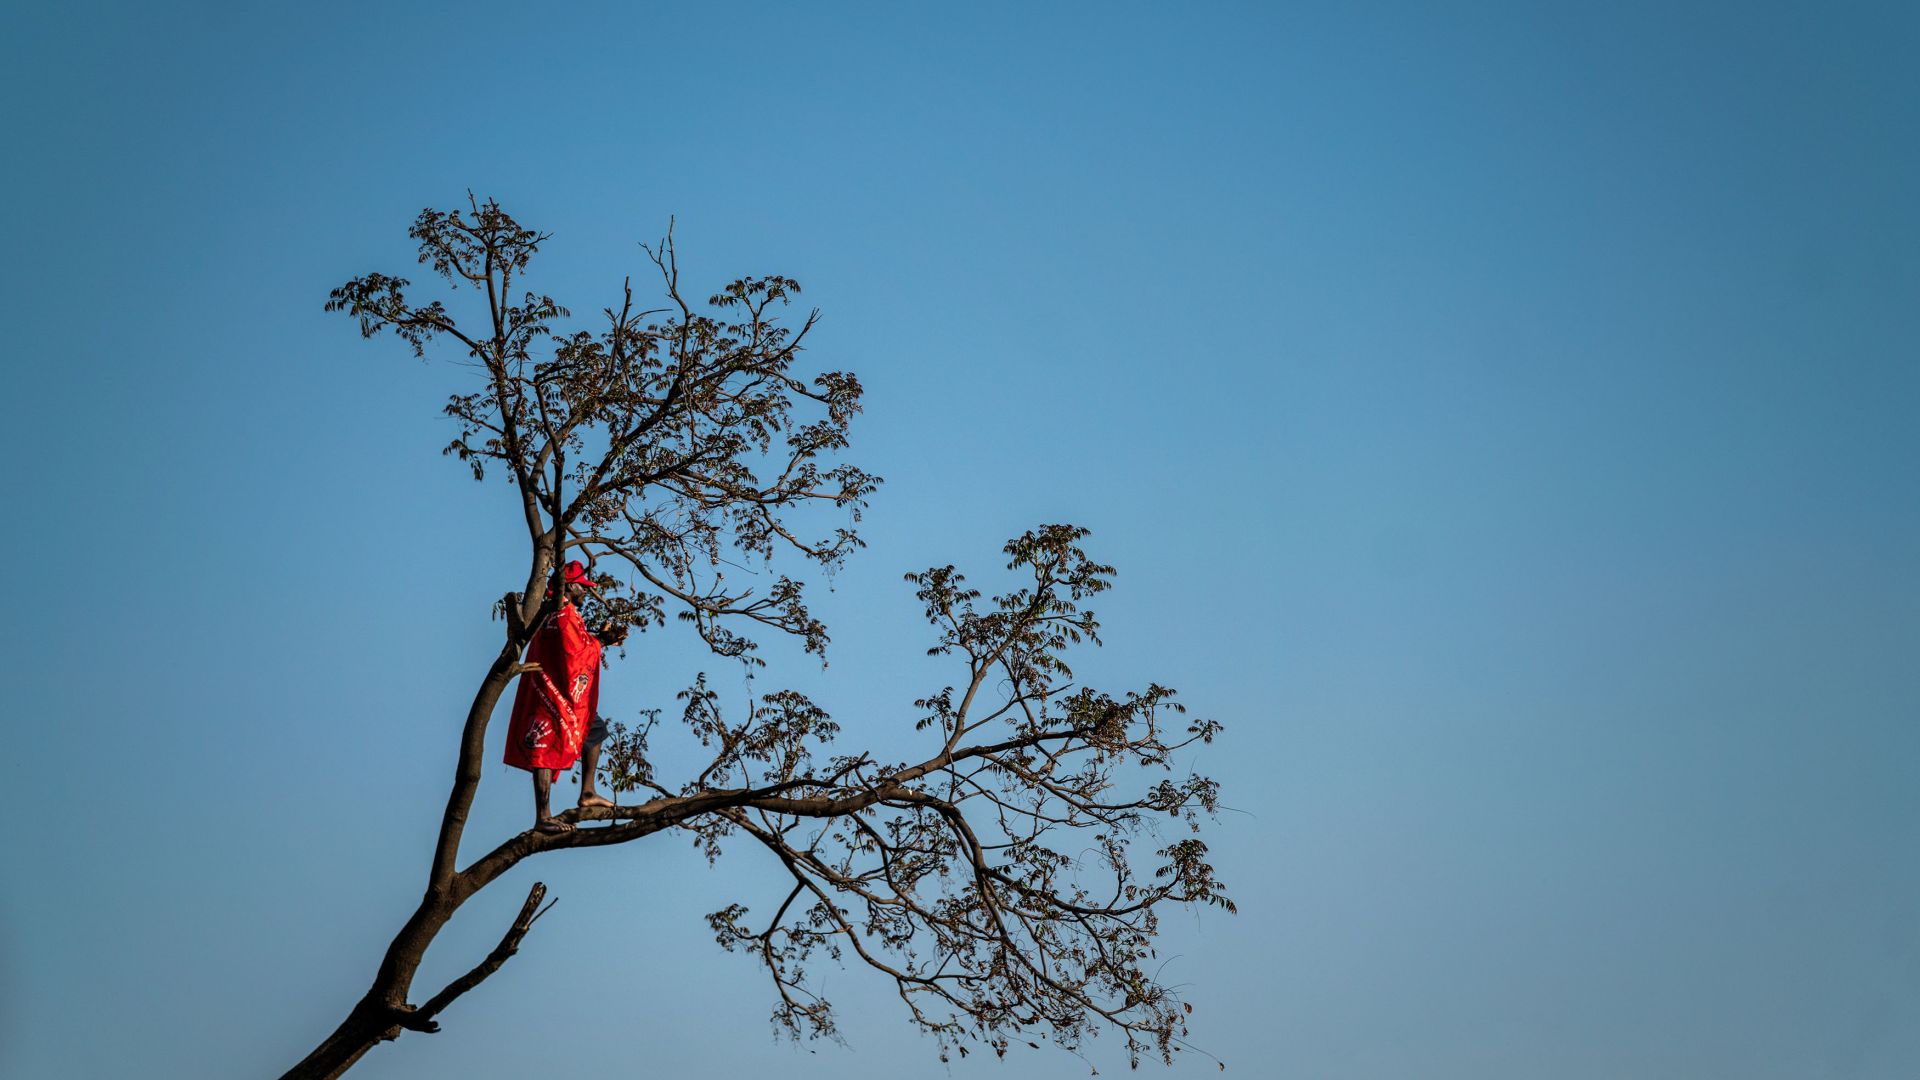 A photo of a person wearing red standing on top of a tree.